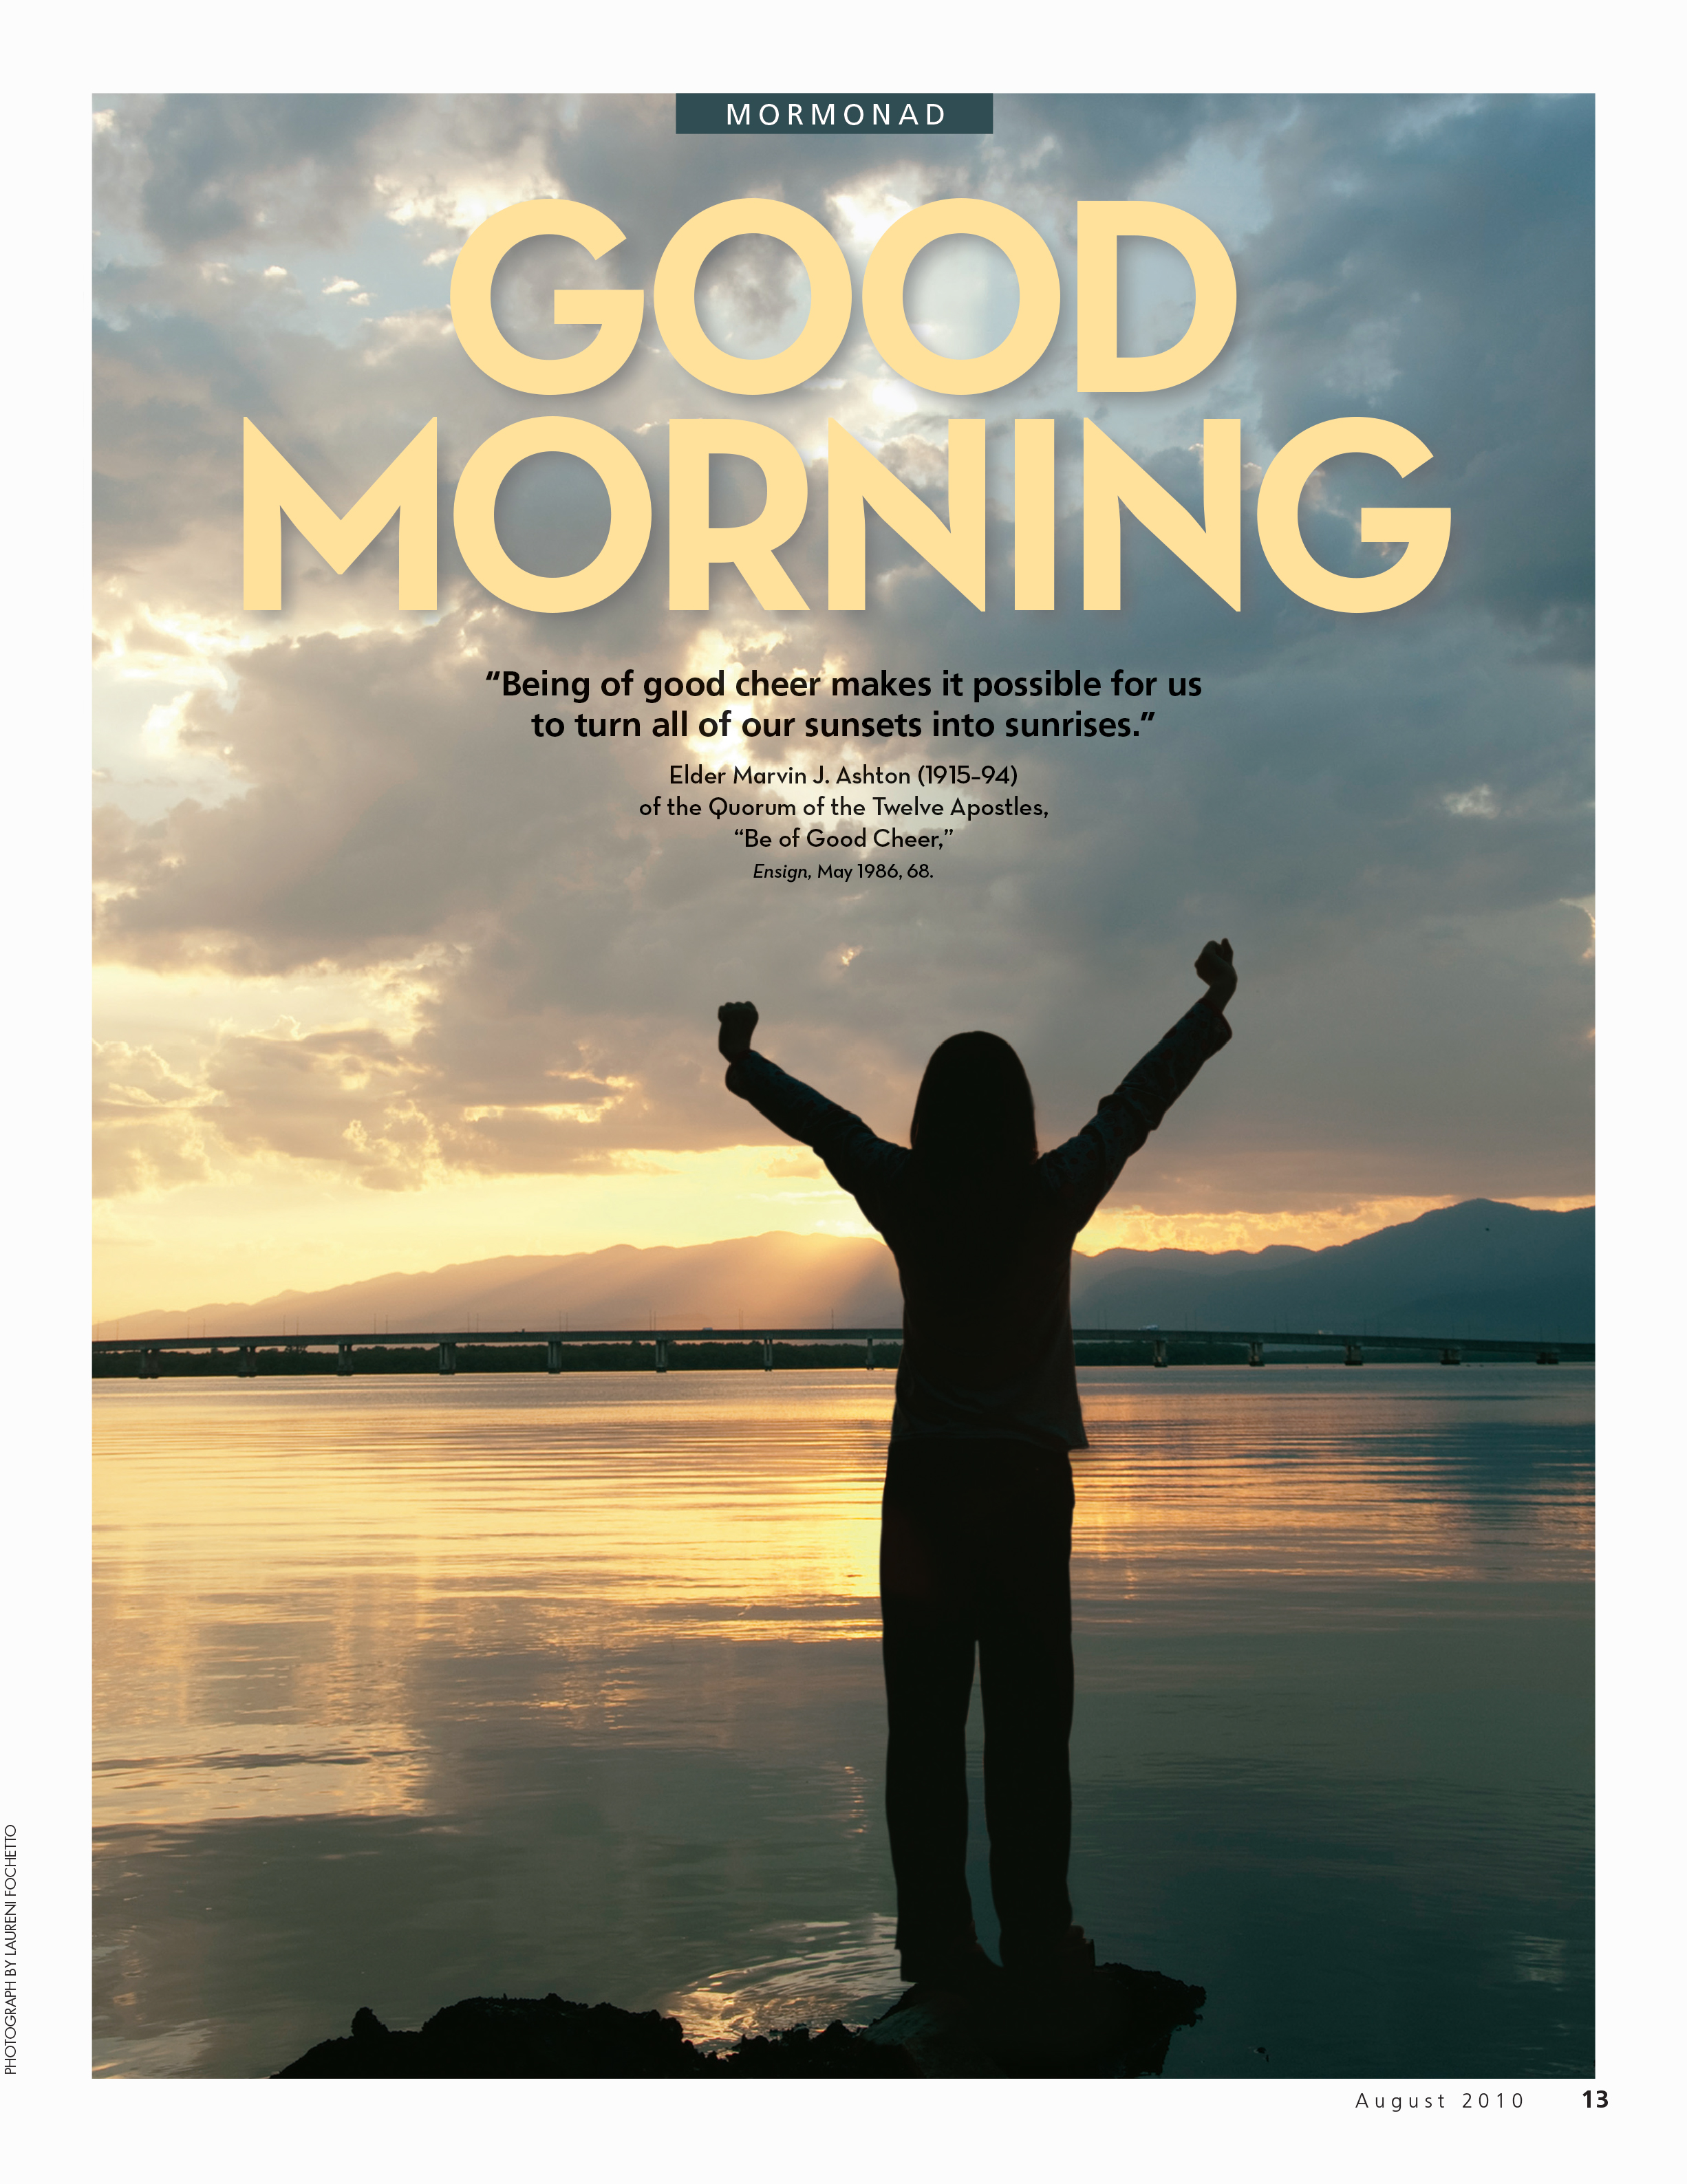 A conceptual photograph showing a silhouette of a woman stretching next to a lake at sunrise, with the words “Good Morning” overhead.